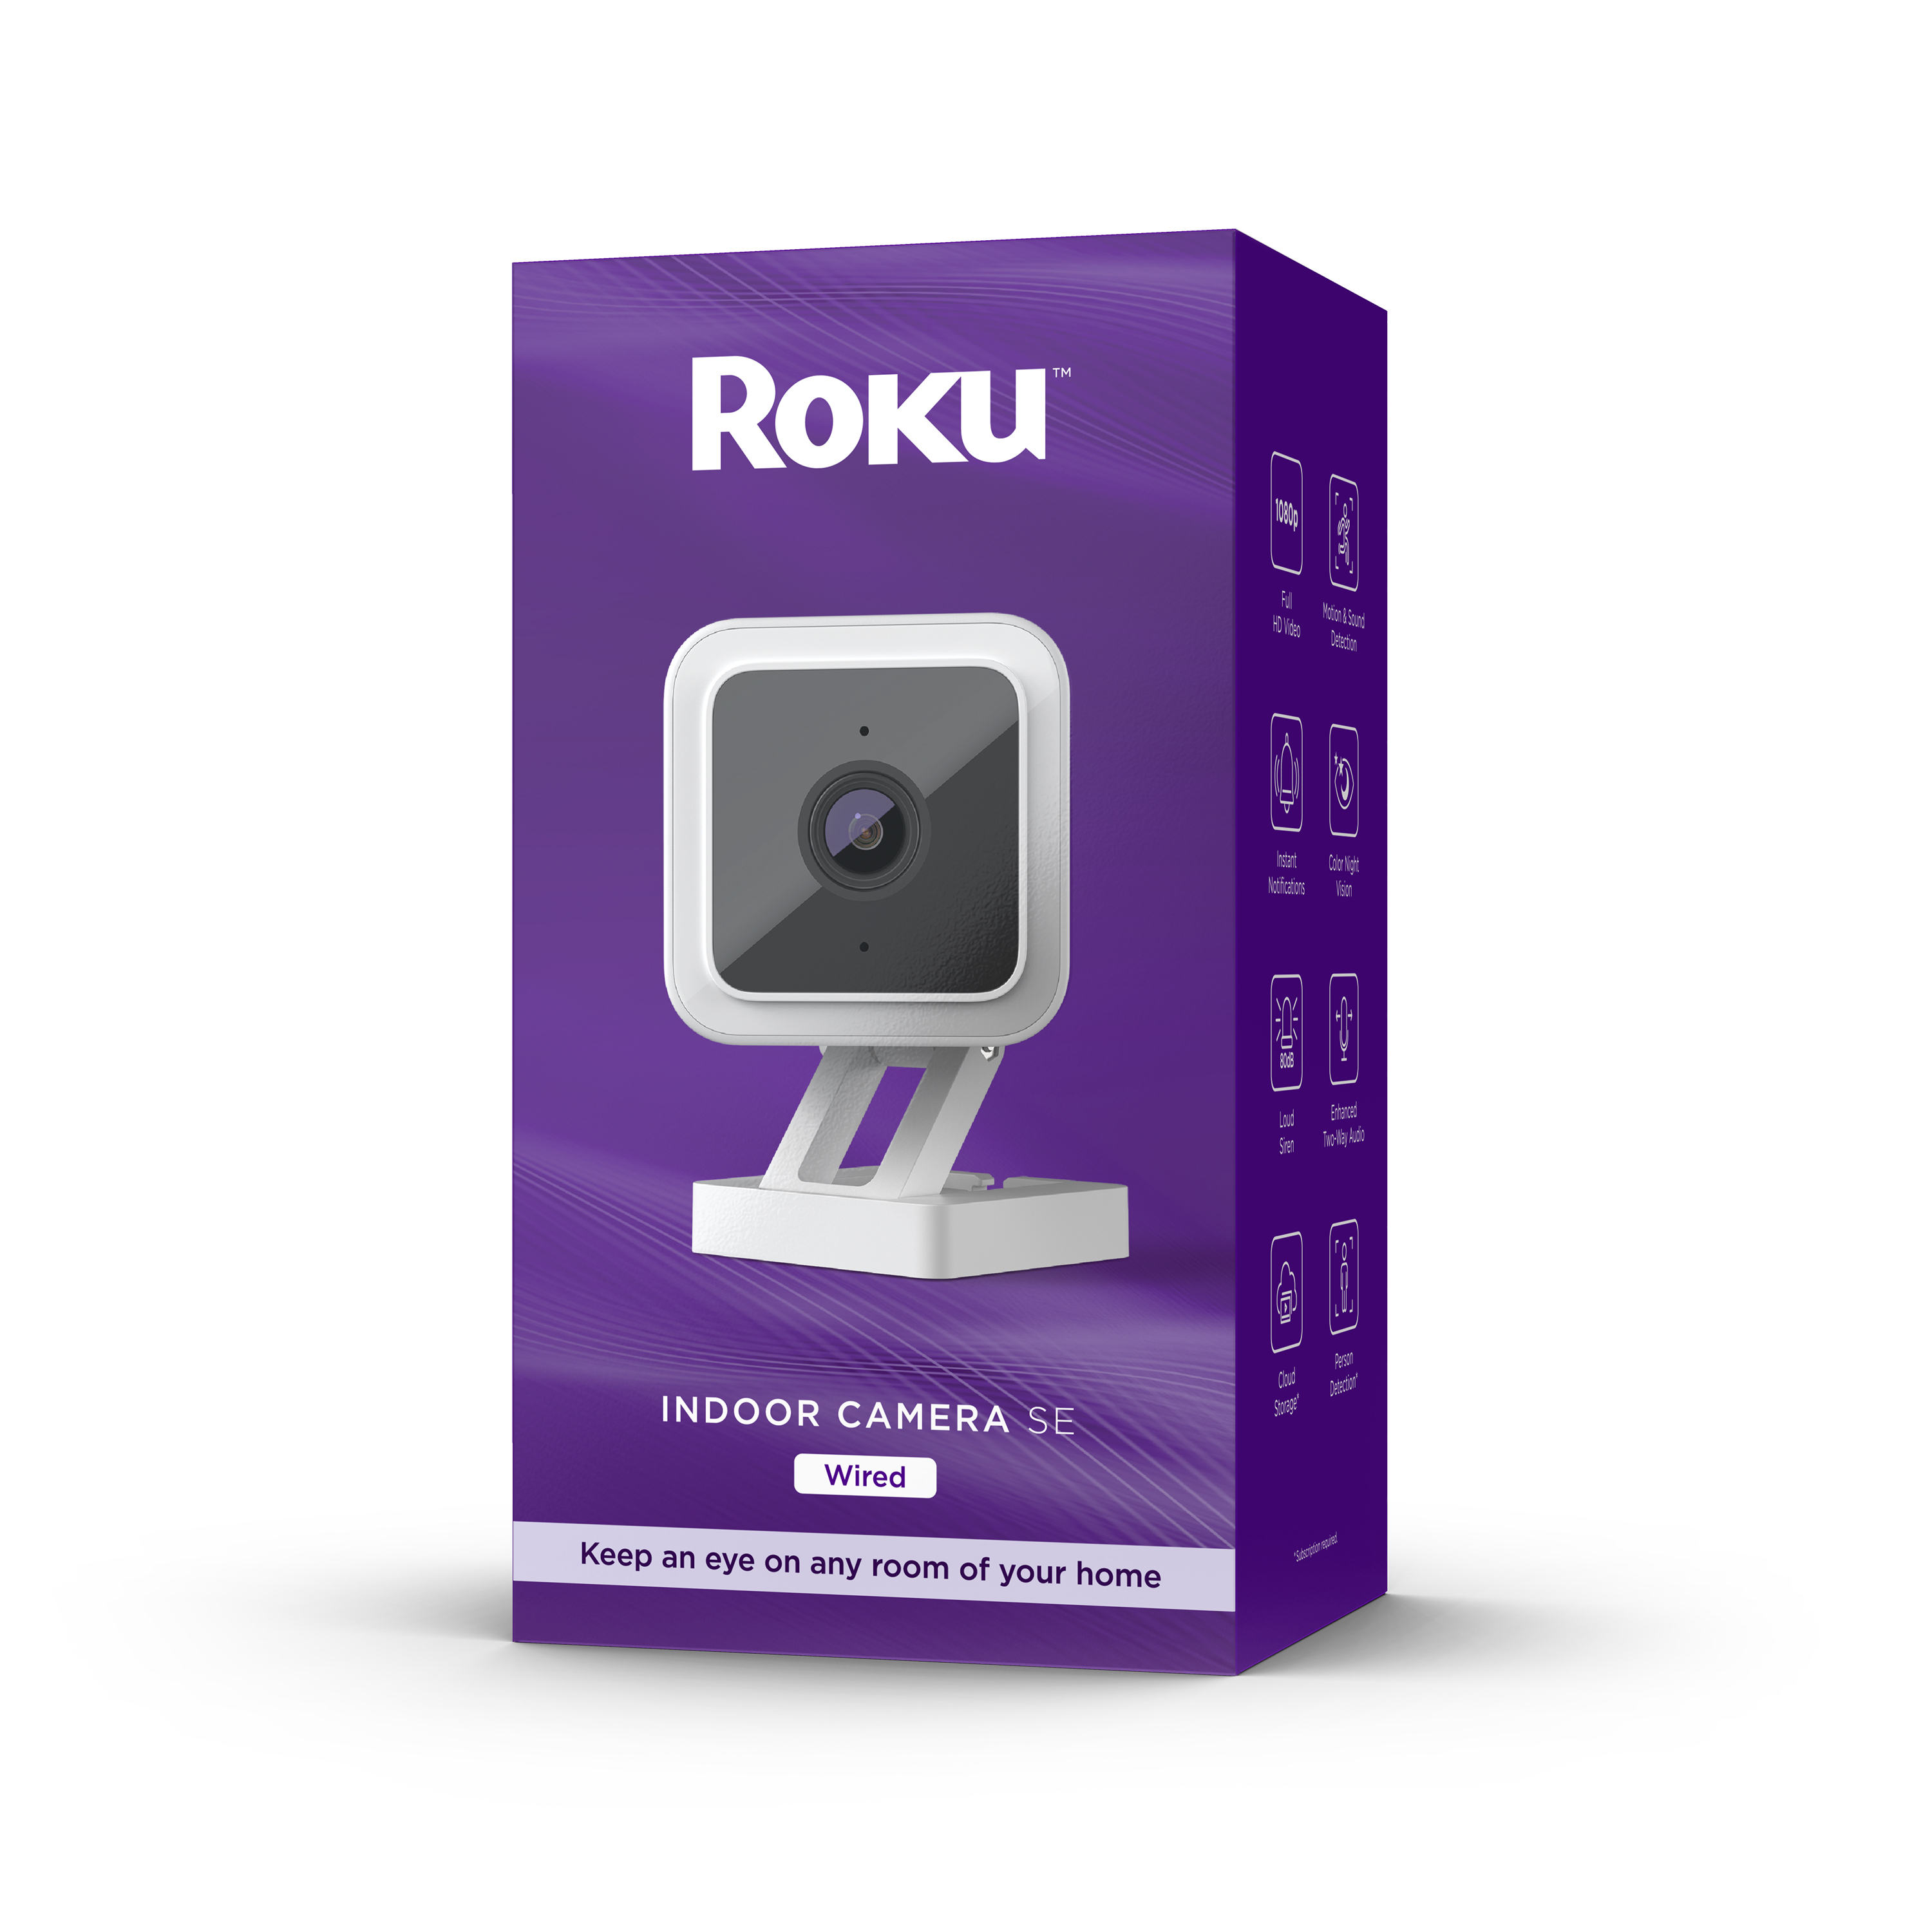 Roku Smart Home Indoor Camera SE Wi-Fi - Wired Security Camera; Motion & Sound Detection - image 1 of 9